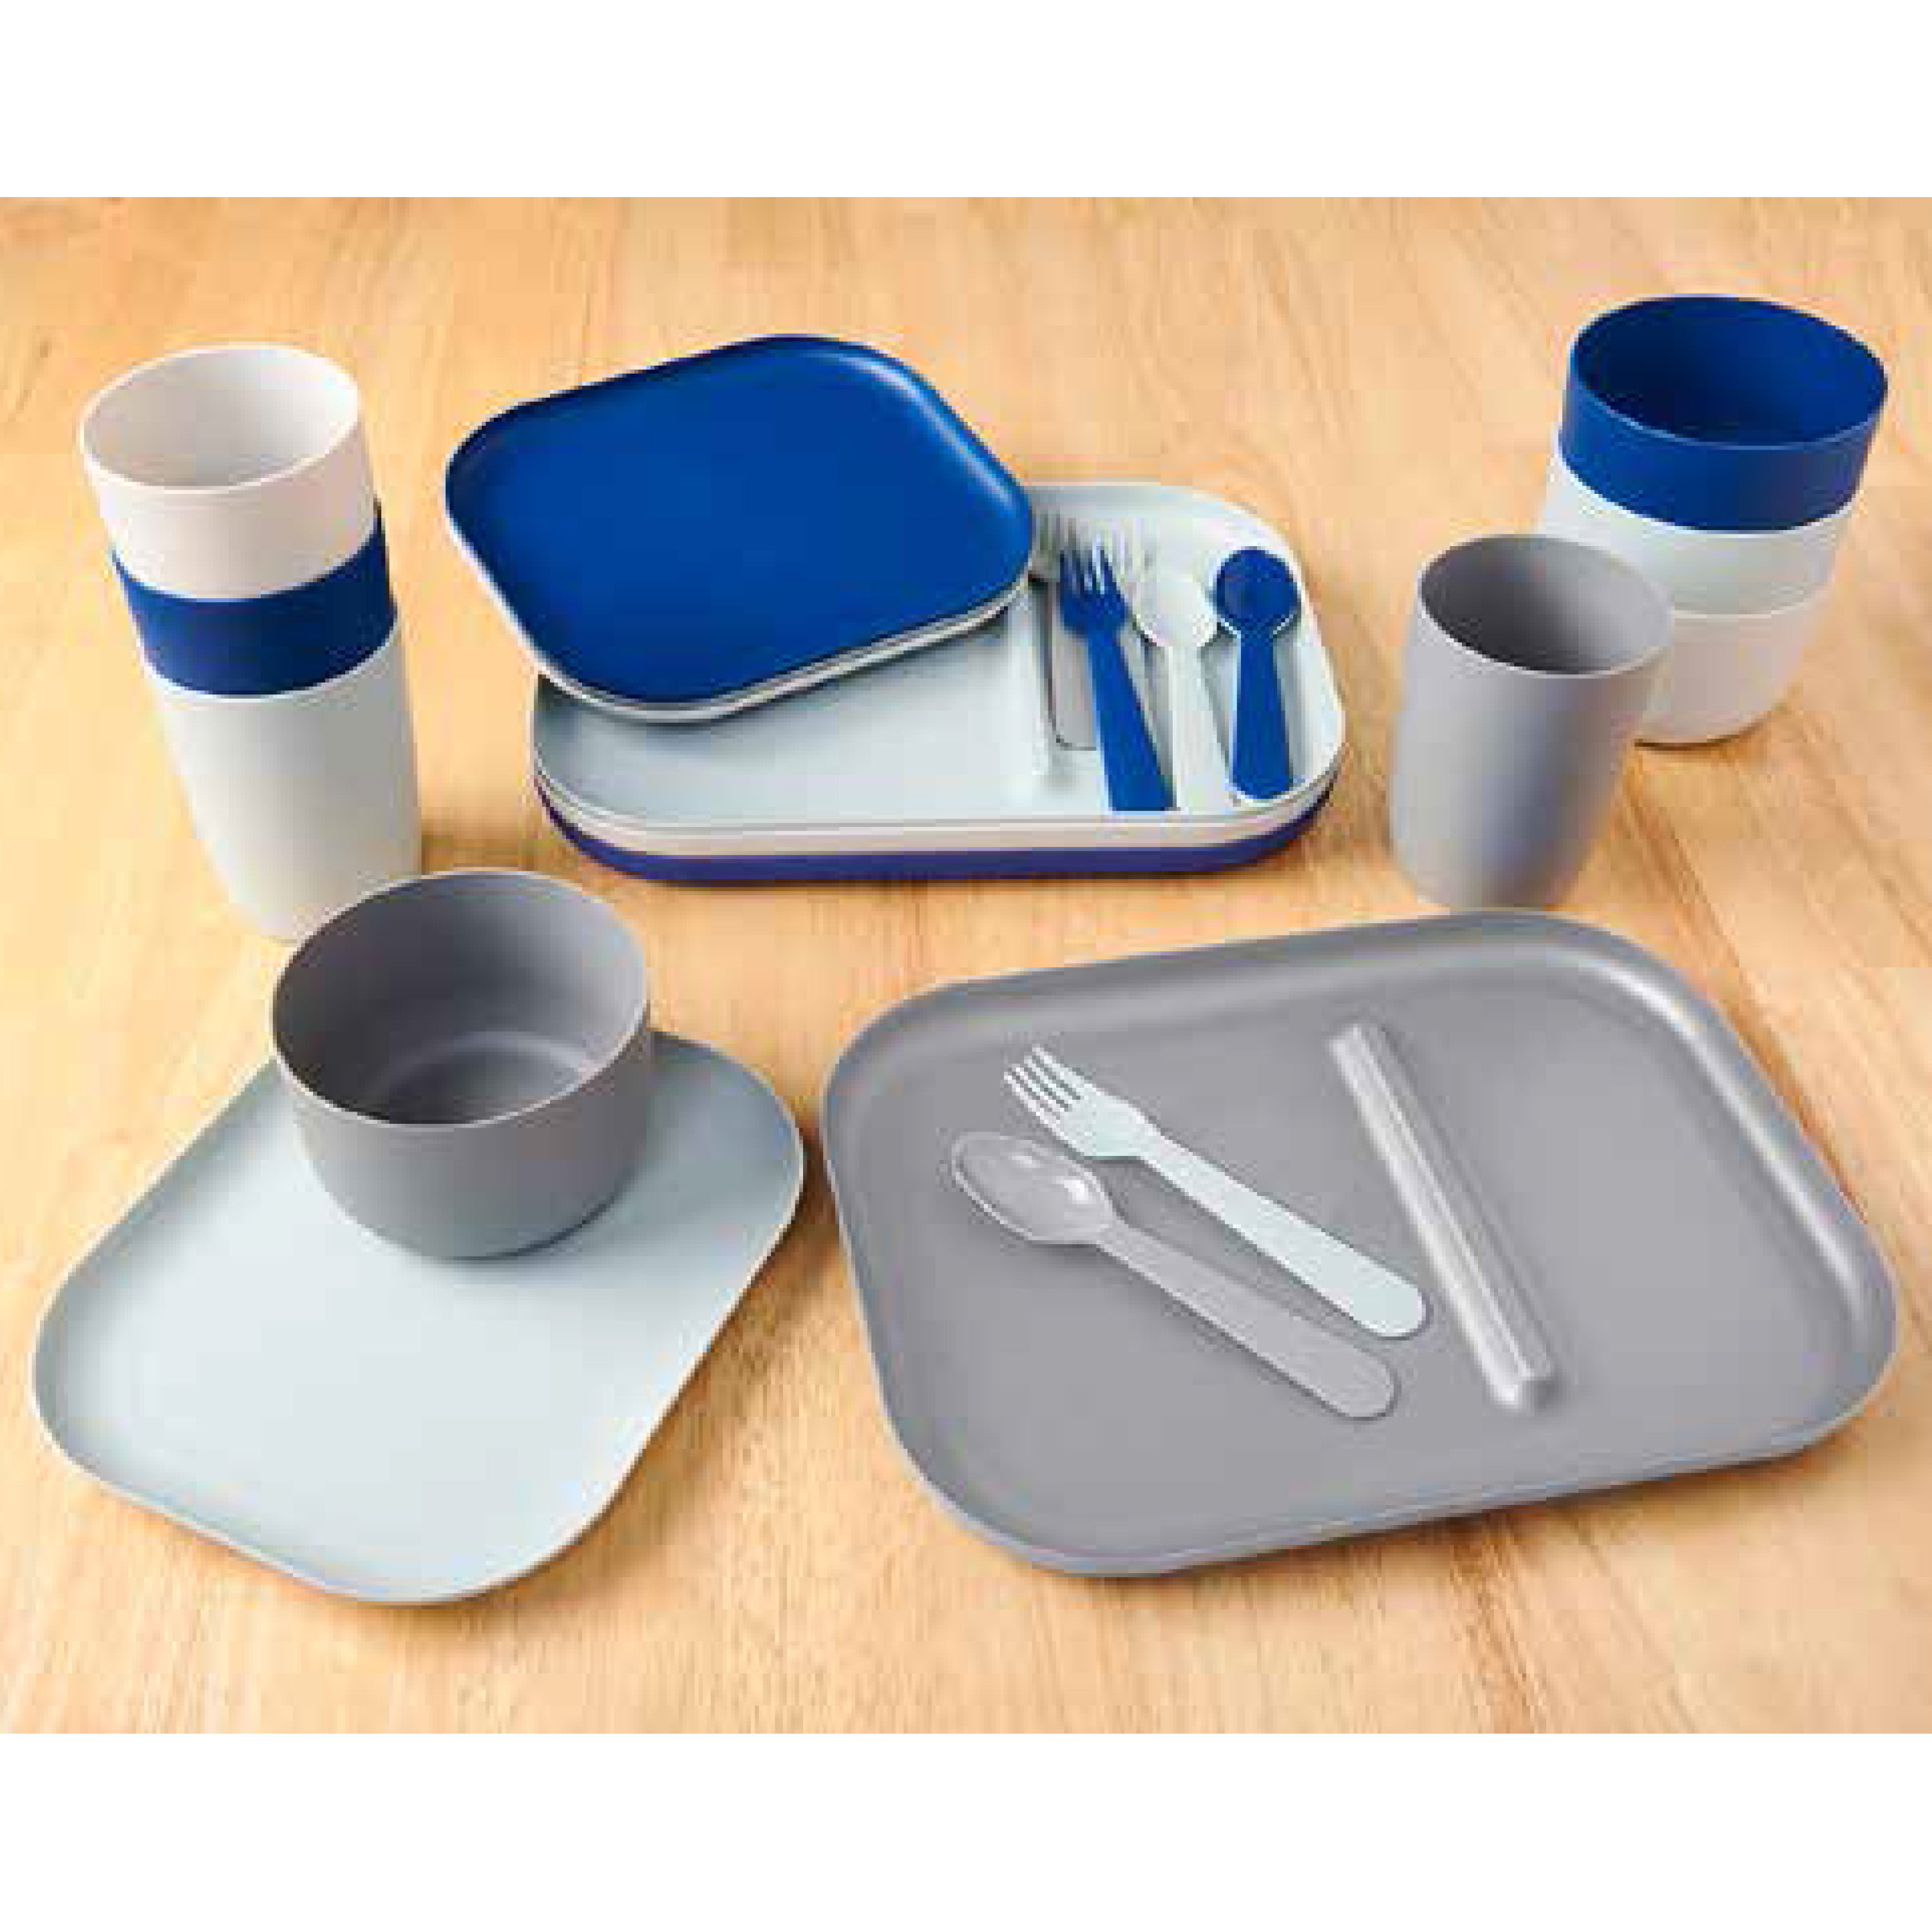 3 PC Construction Themed Dinnerware Dinneractive Dining Set For Kids 